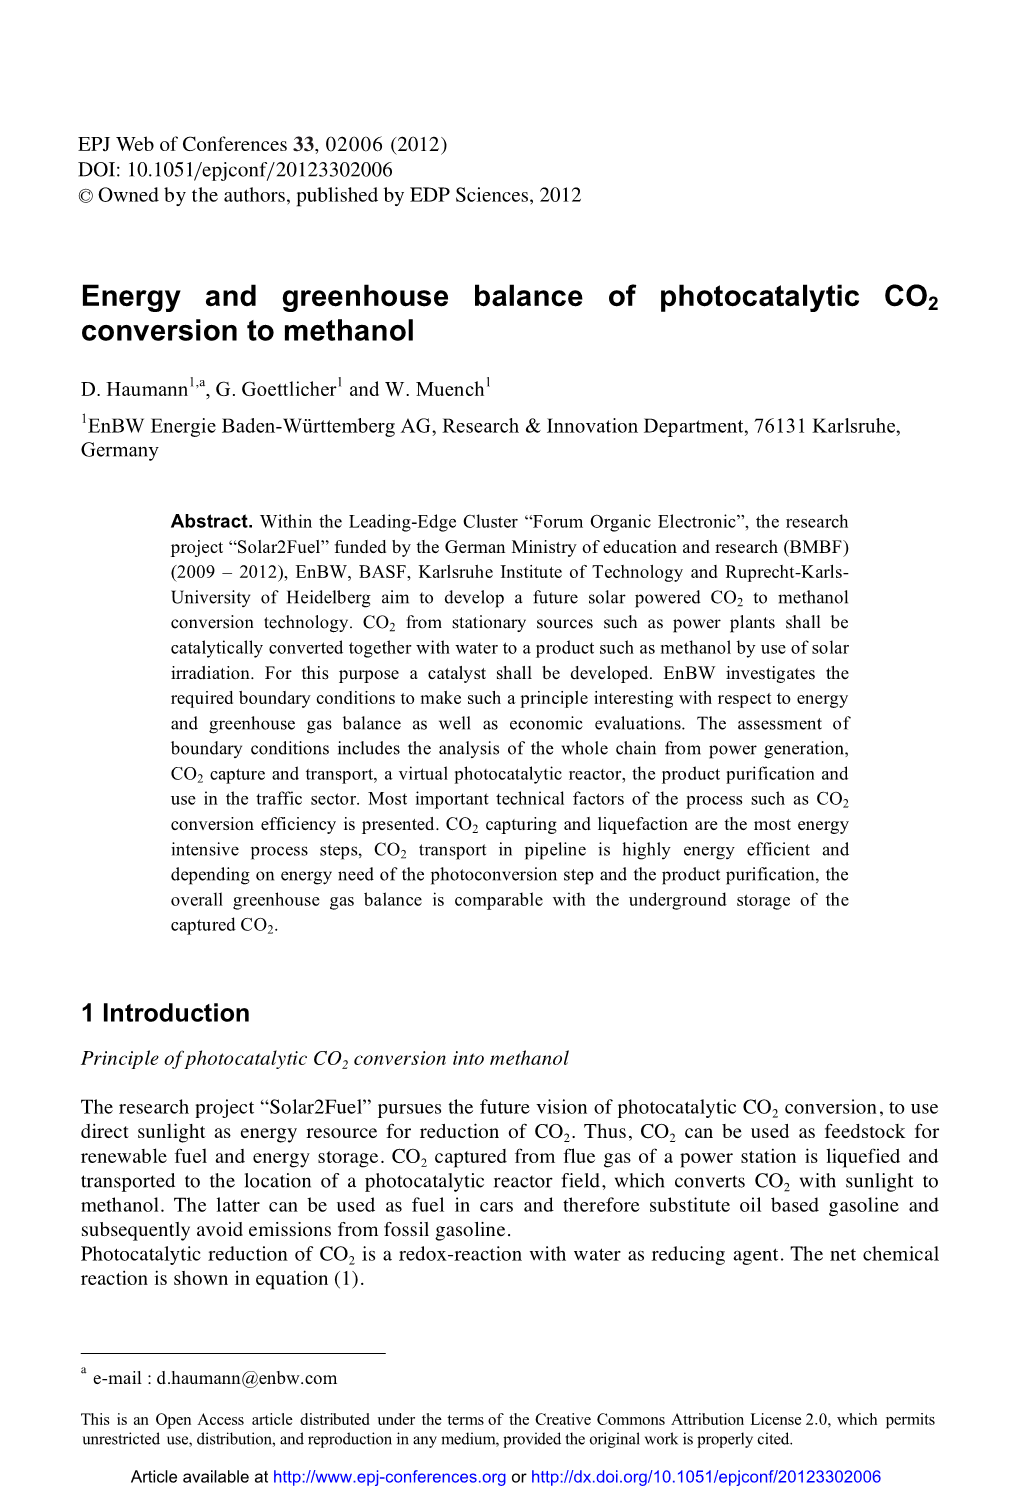 Energy and Greenhouse Balance of Photocatalytic CO2 Conversion to Methanol